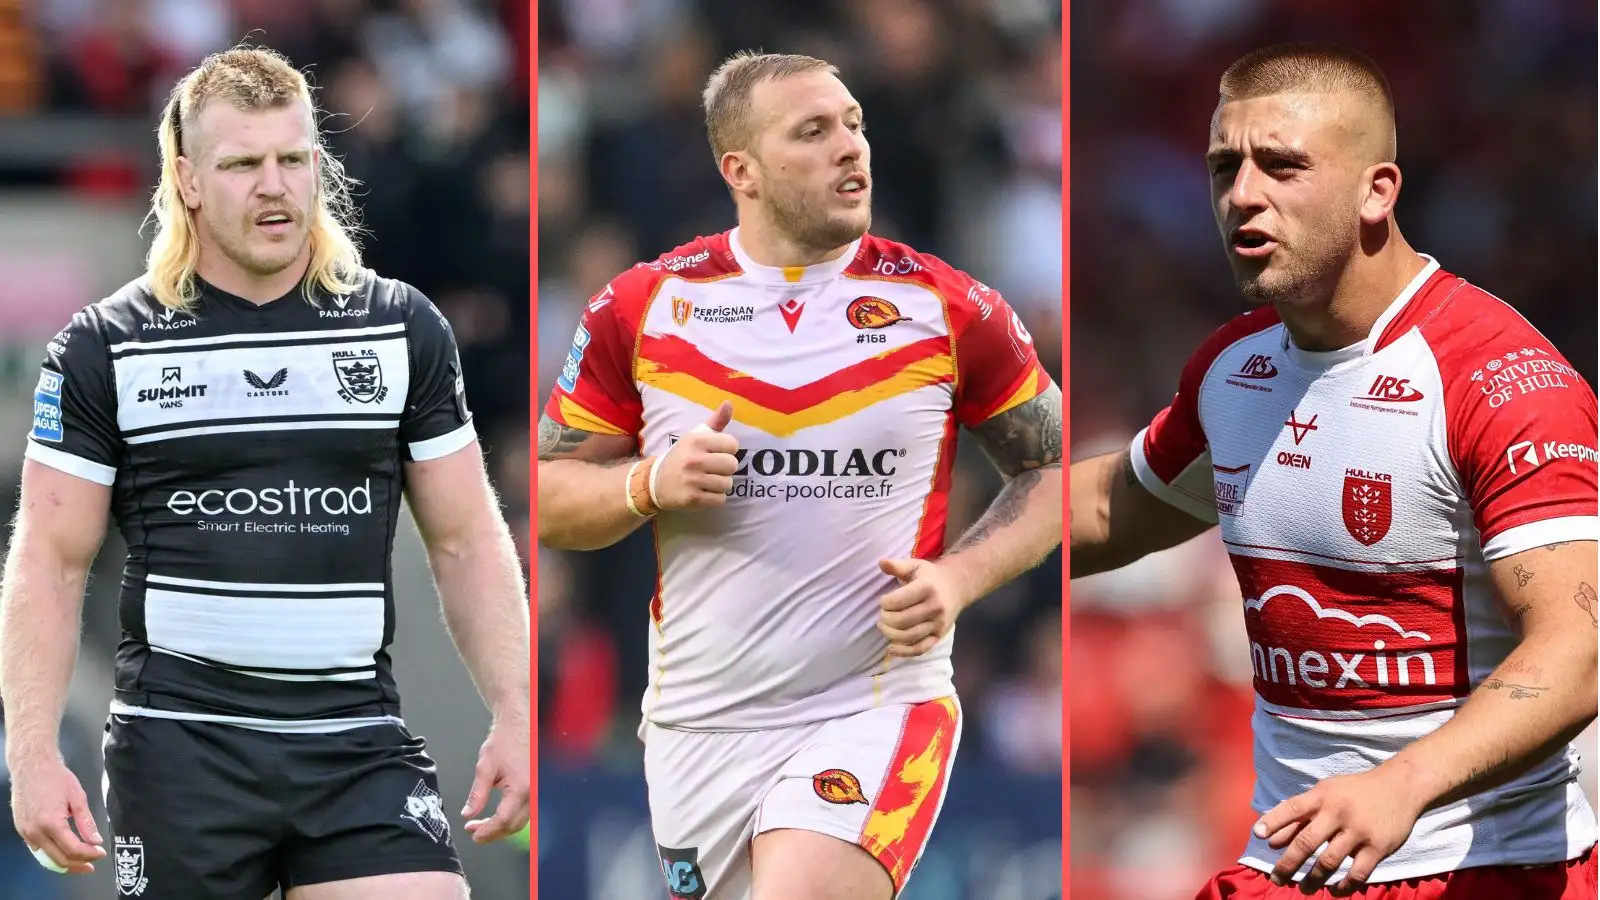 An ultimate 13 of rugby league players born in Hull, featuring FC and KR stars aplenty